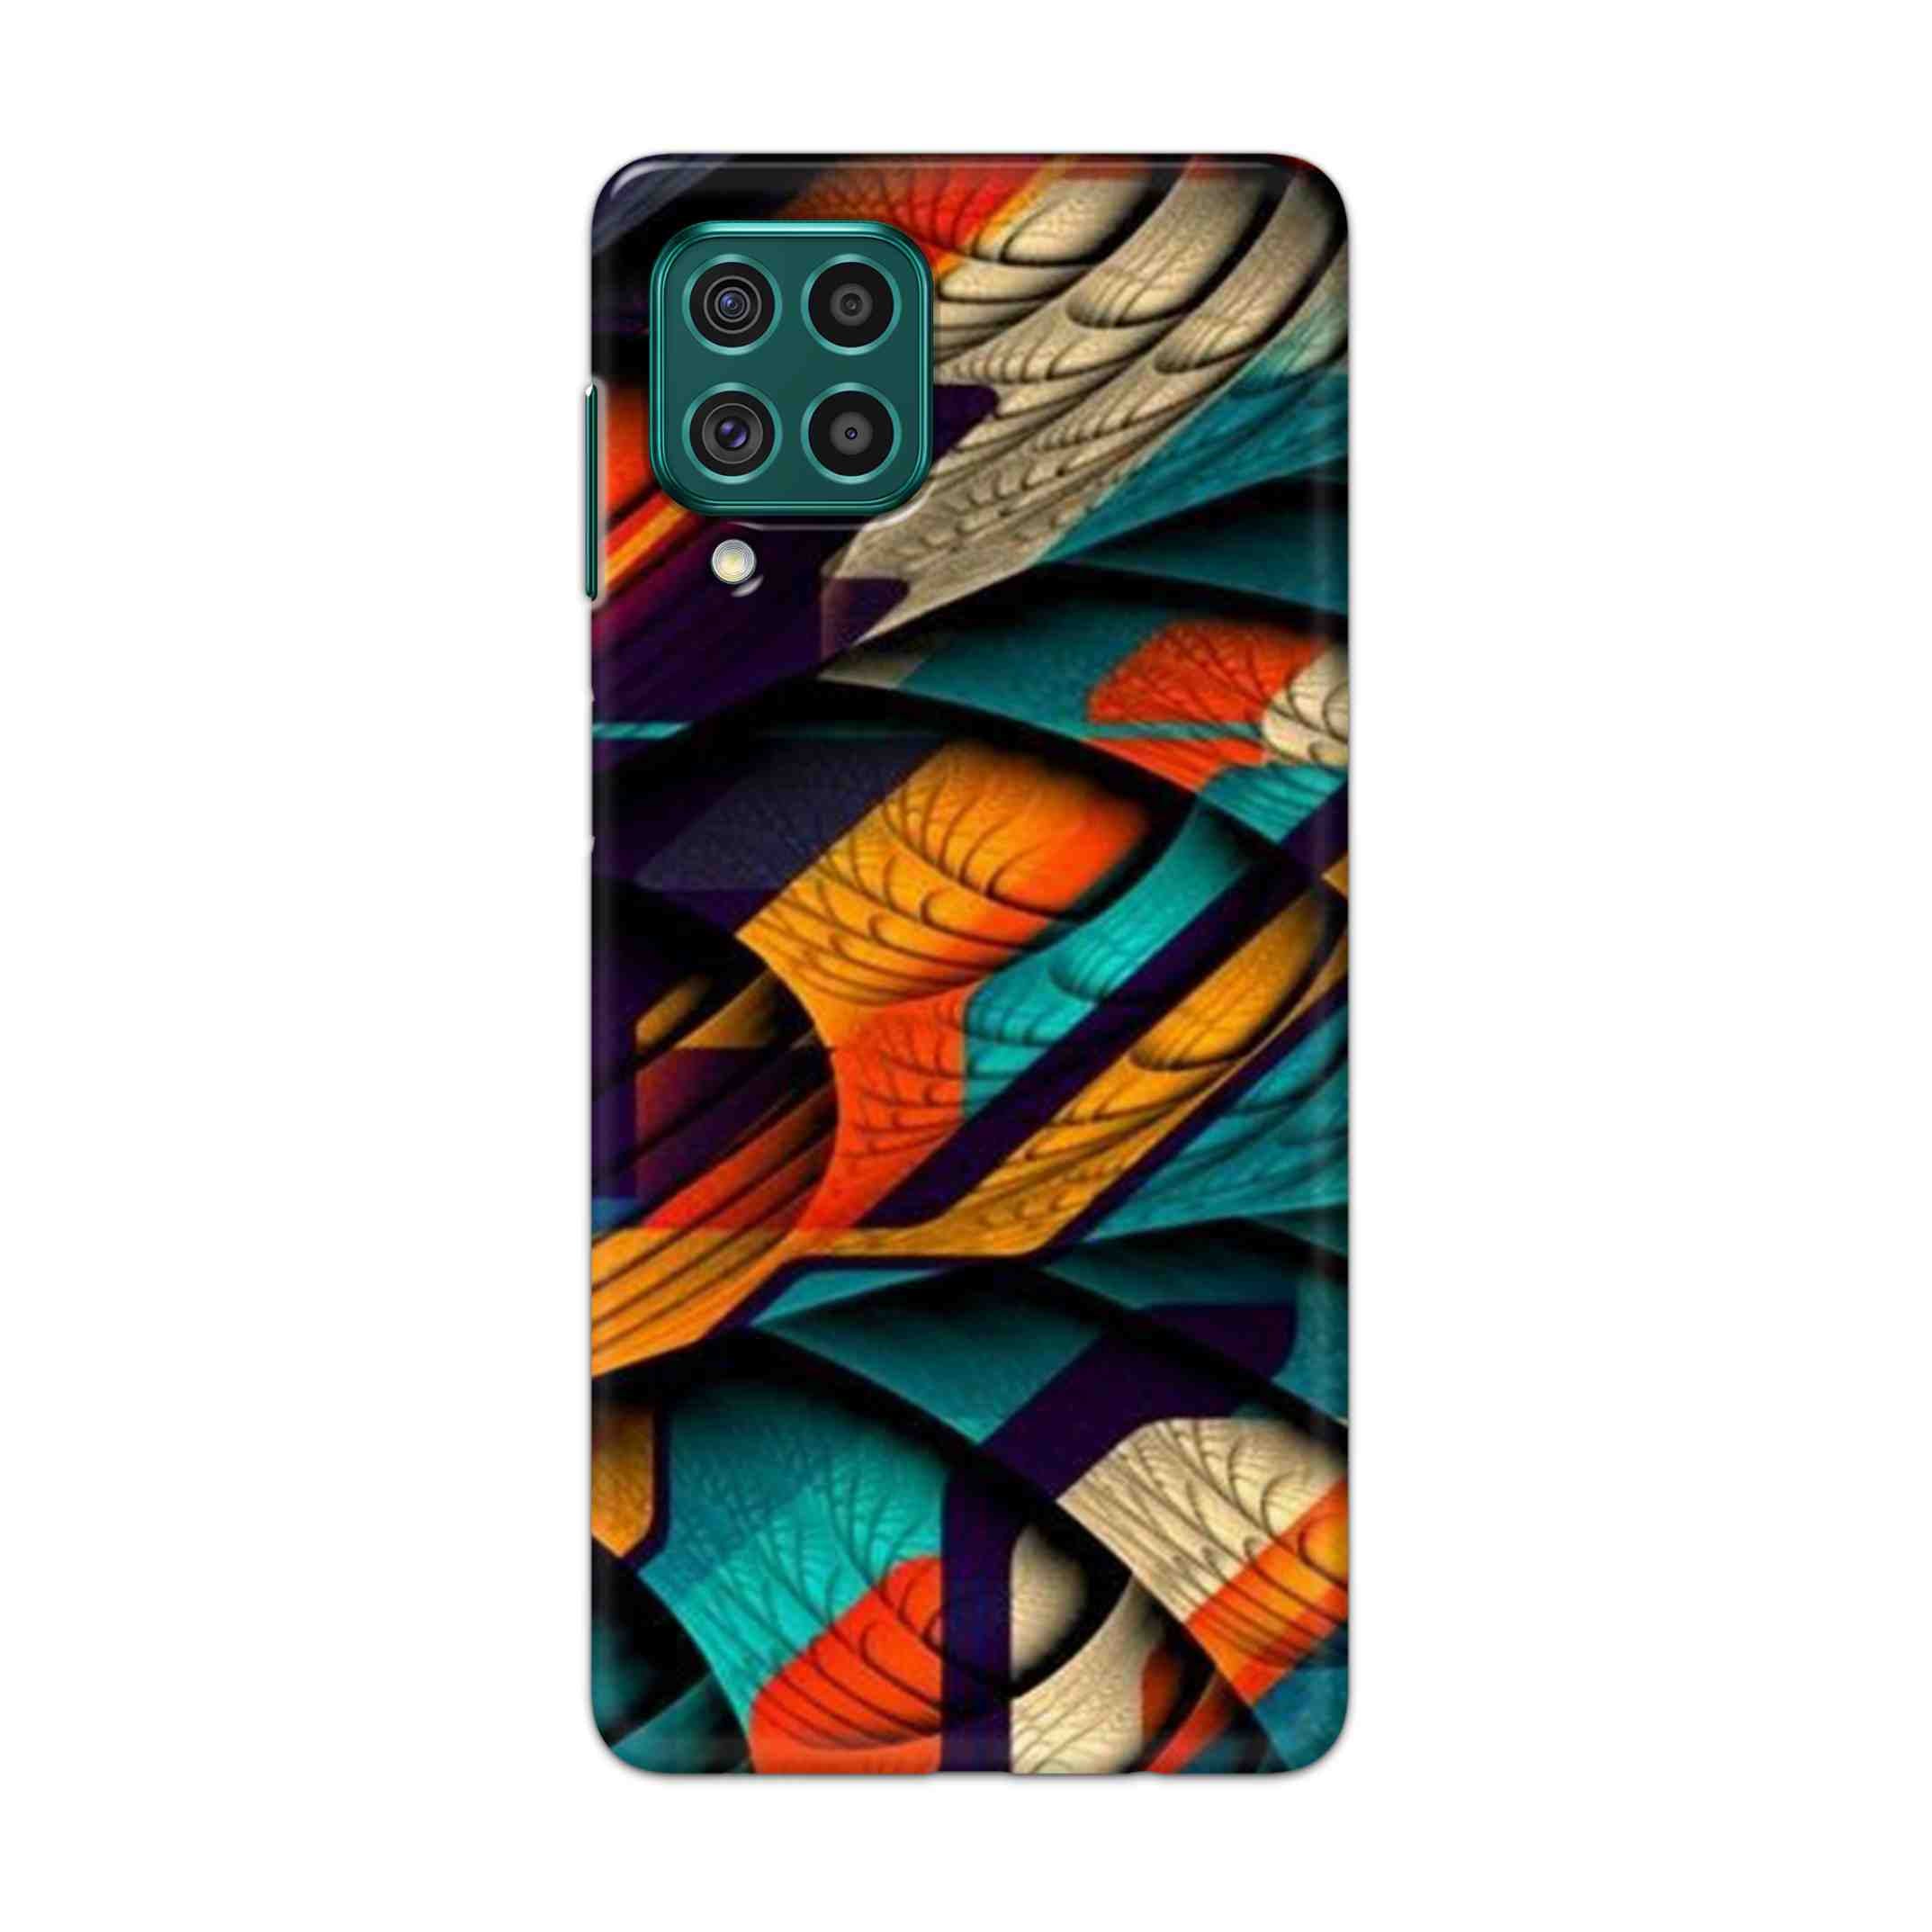 Buy Colour Abstract Hard Back Mobile Phone Case Cover For Galaxy F62 Online